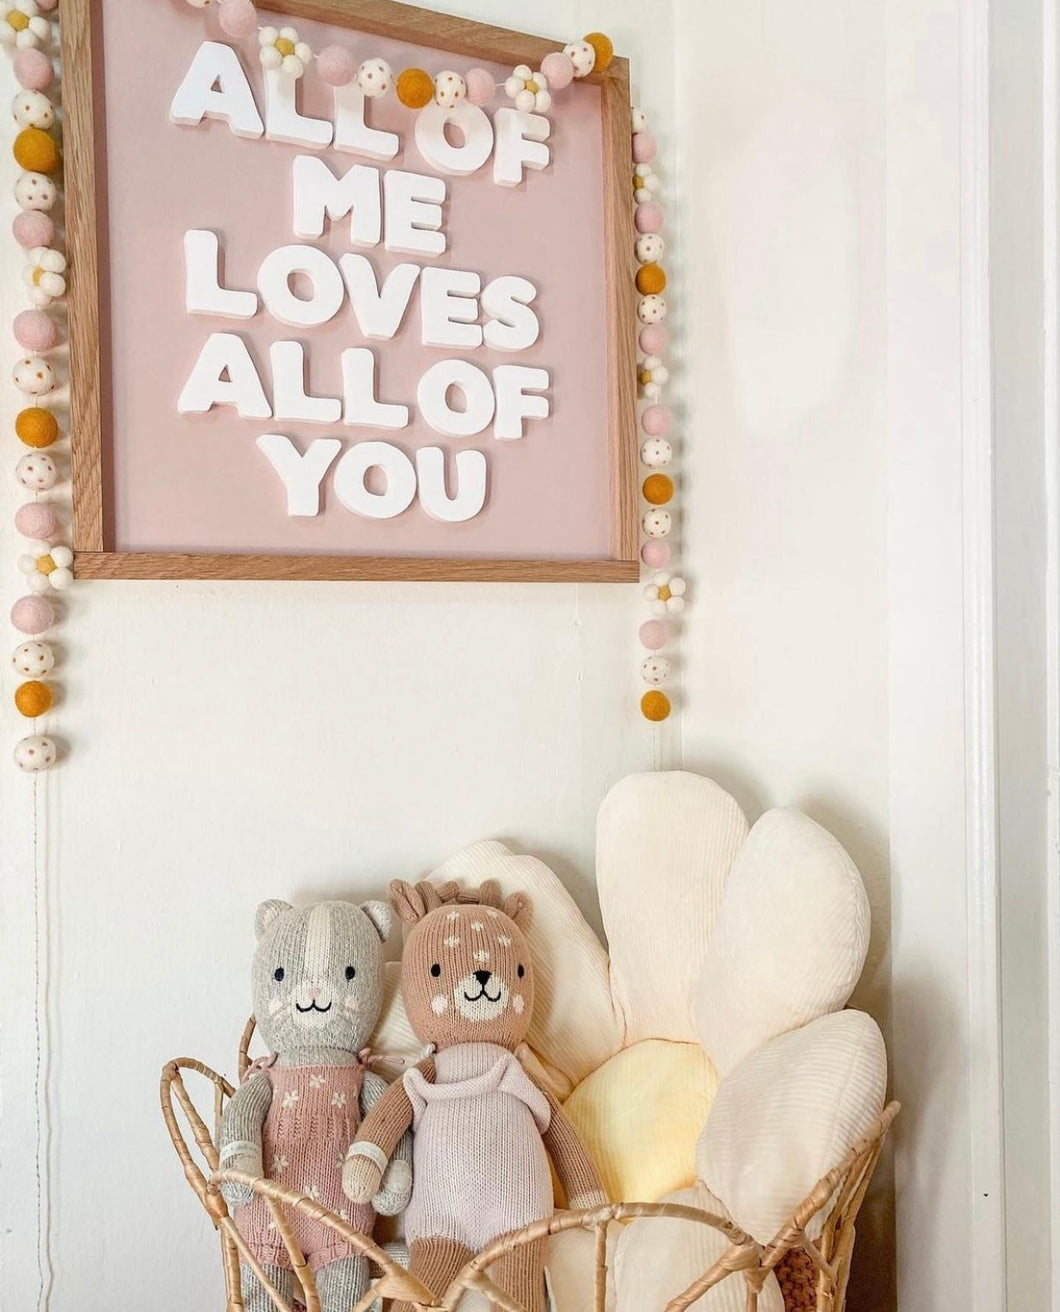 All of me love all of you- white cutout letters light peachy/pink background